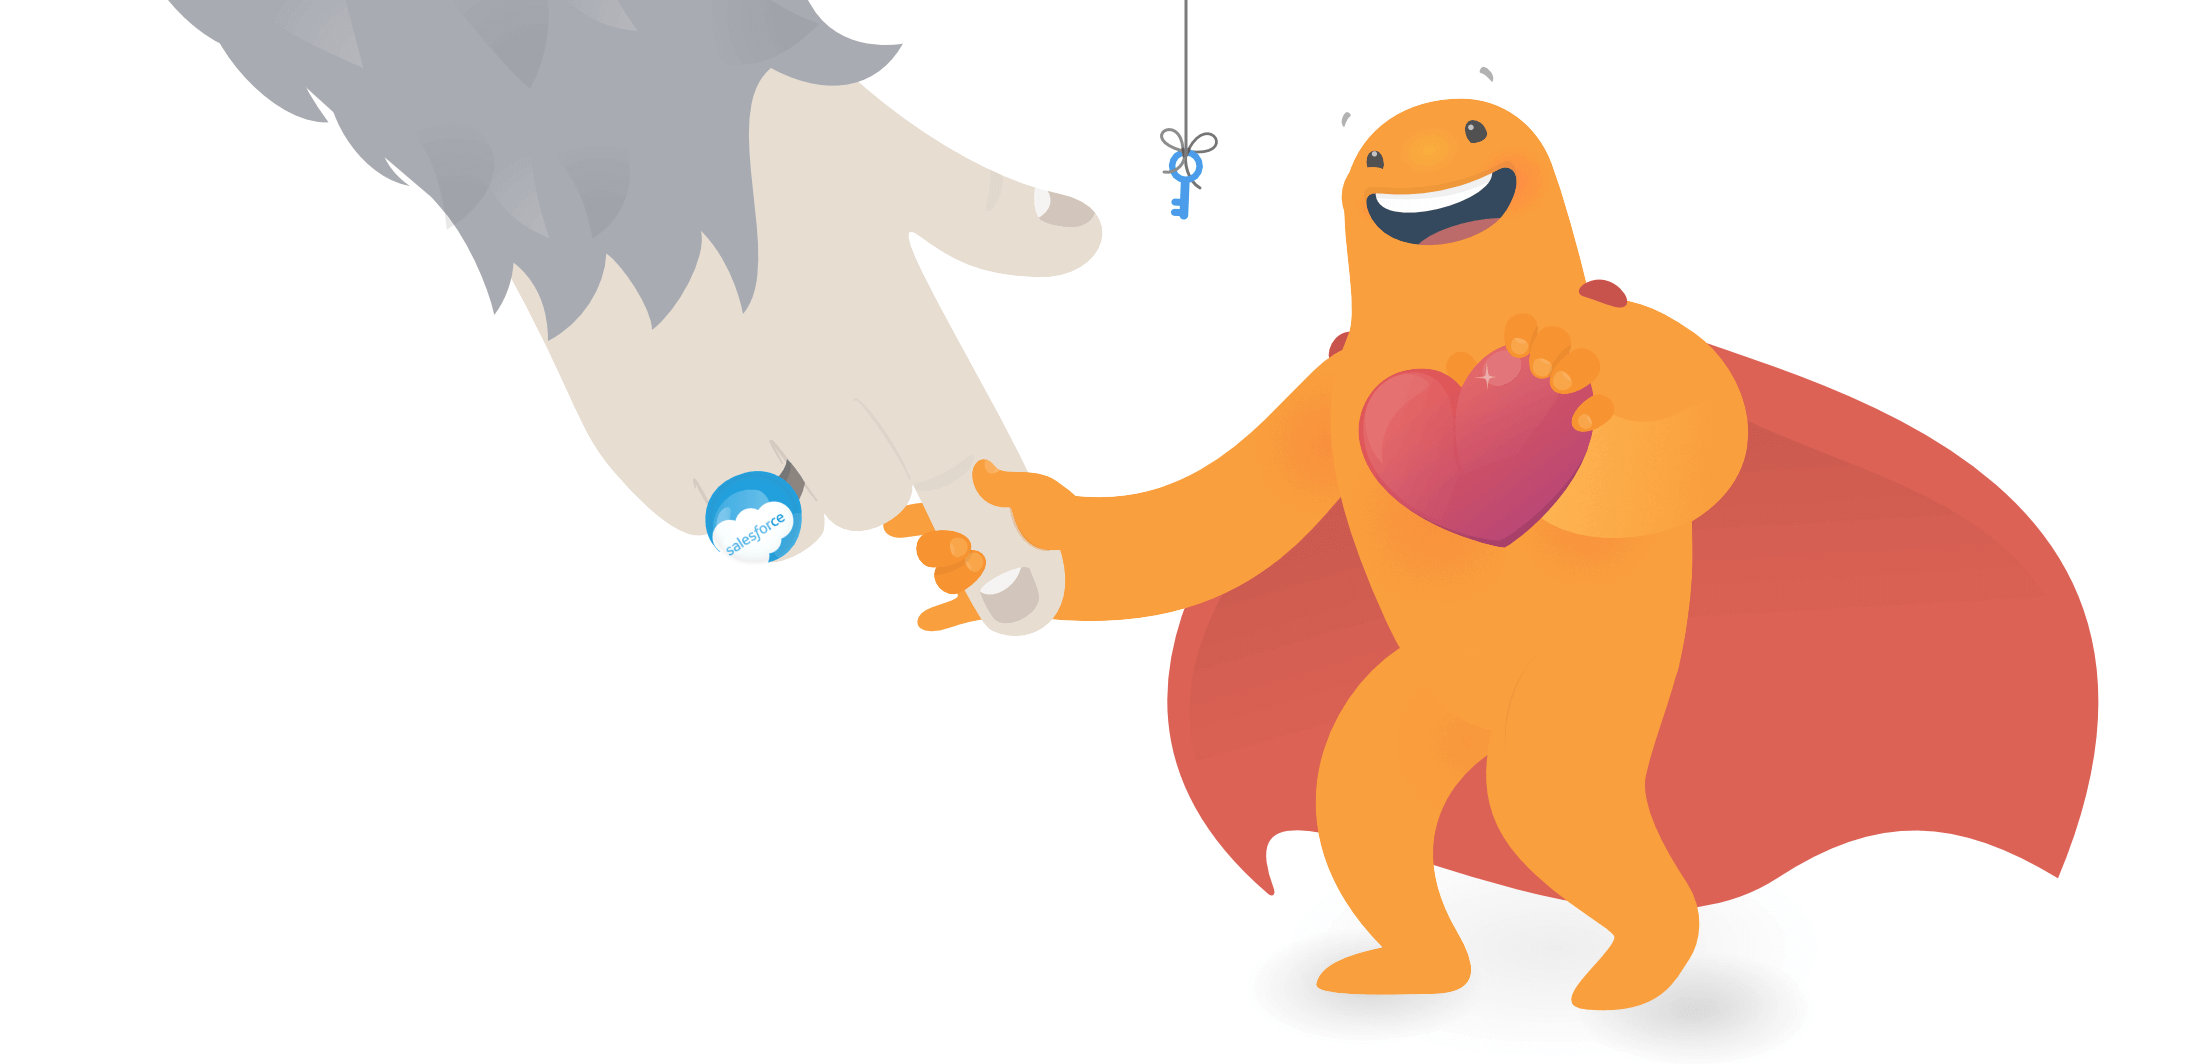 An illustration showing SurveyLegend's mascot and Salesforce's monster, becoming friends